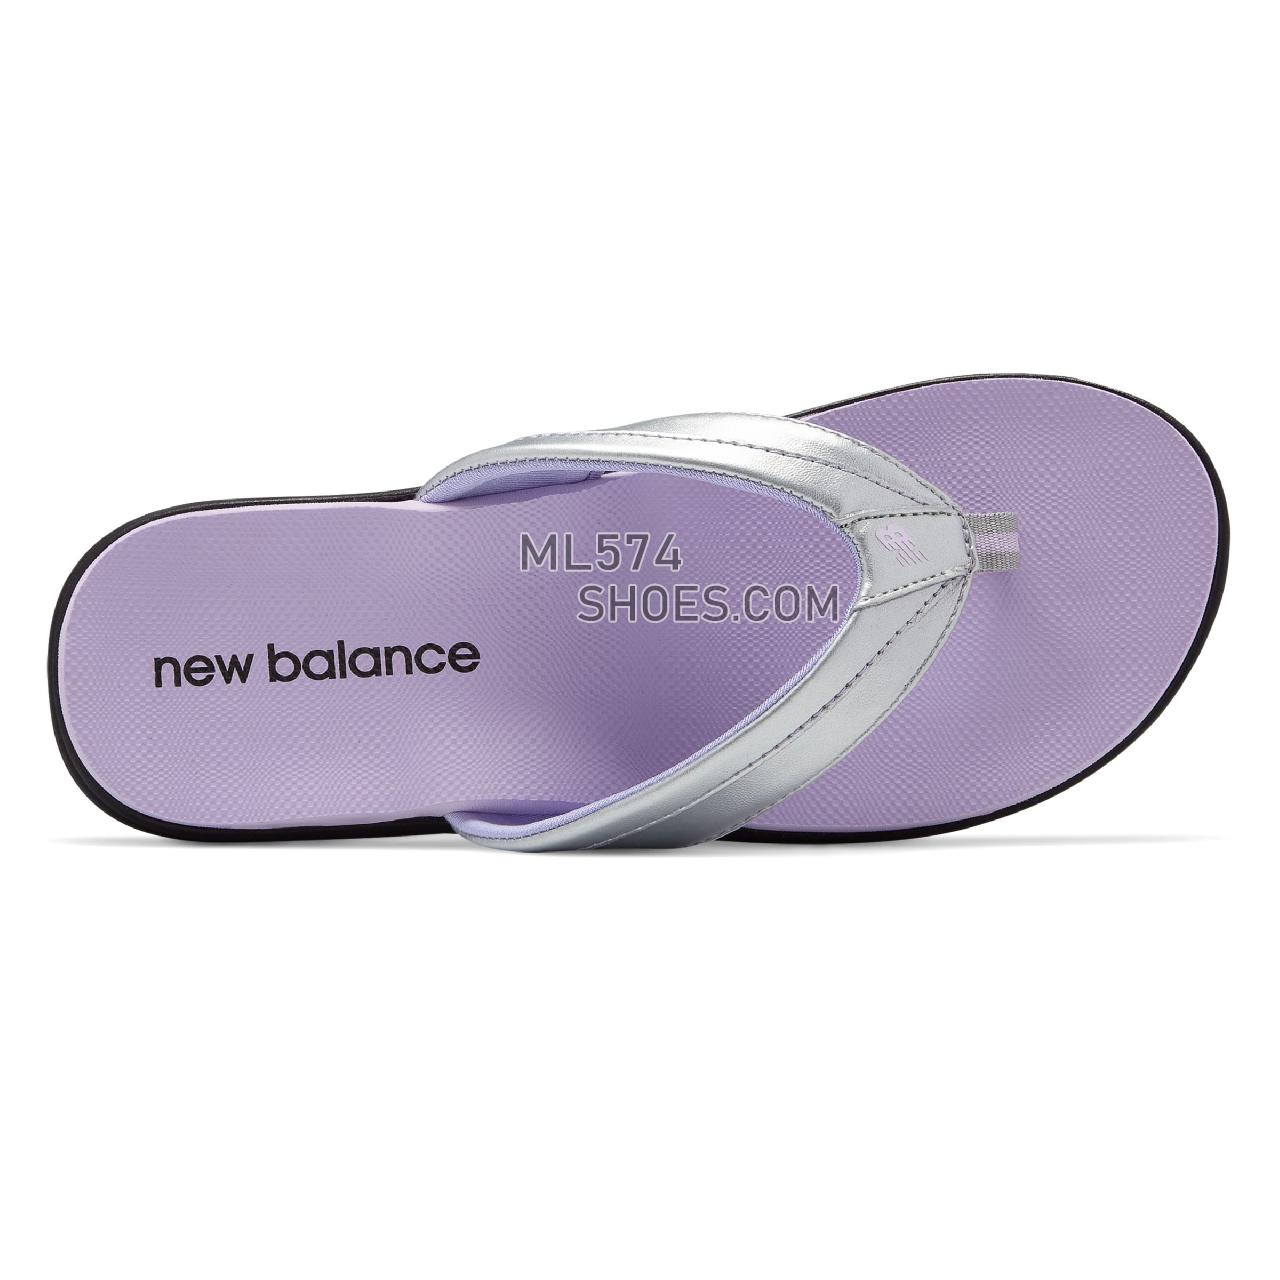 New Balance Jojo Thong - Women's 6090 - Sandals Silver with Violet - W6090SLV